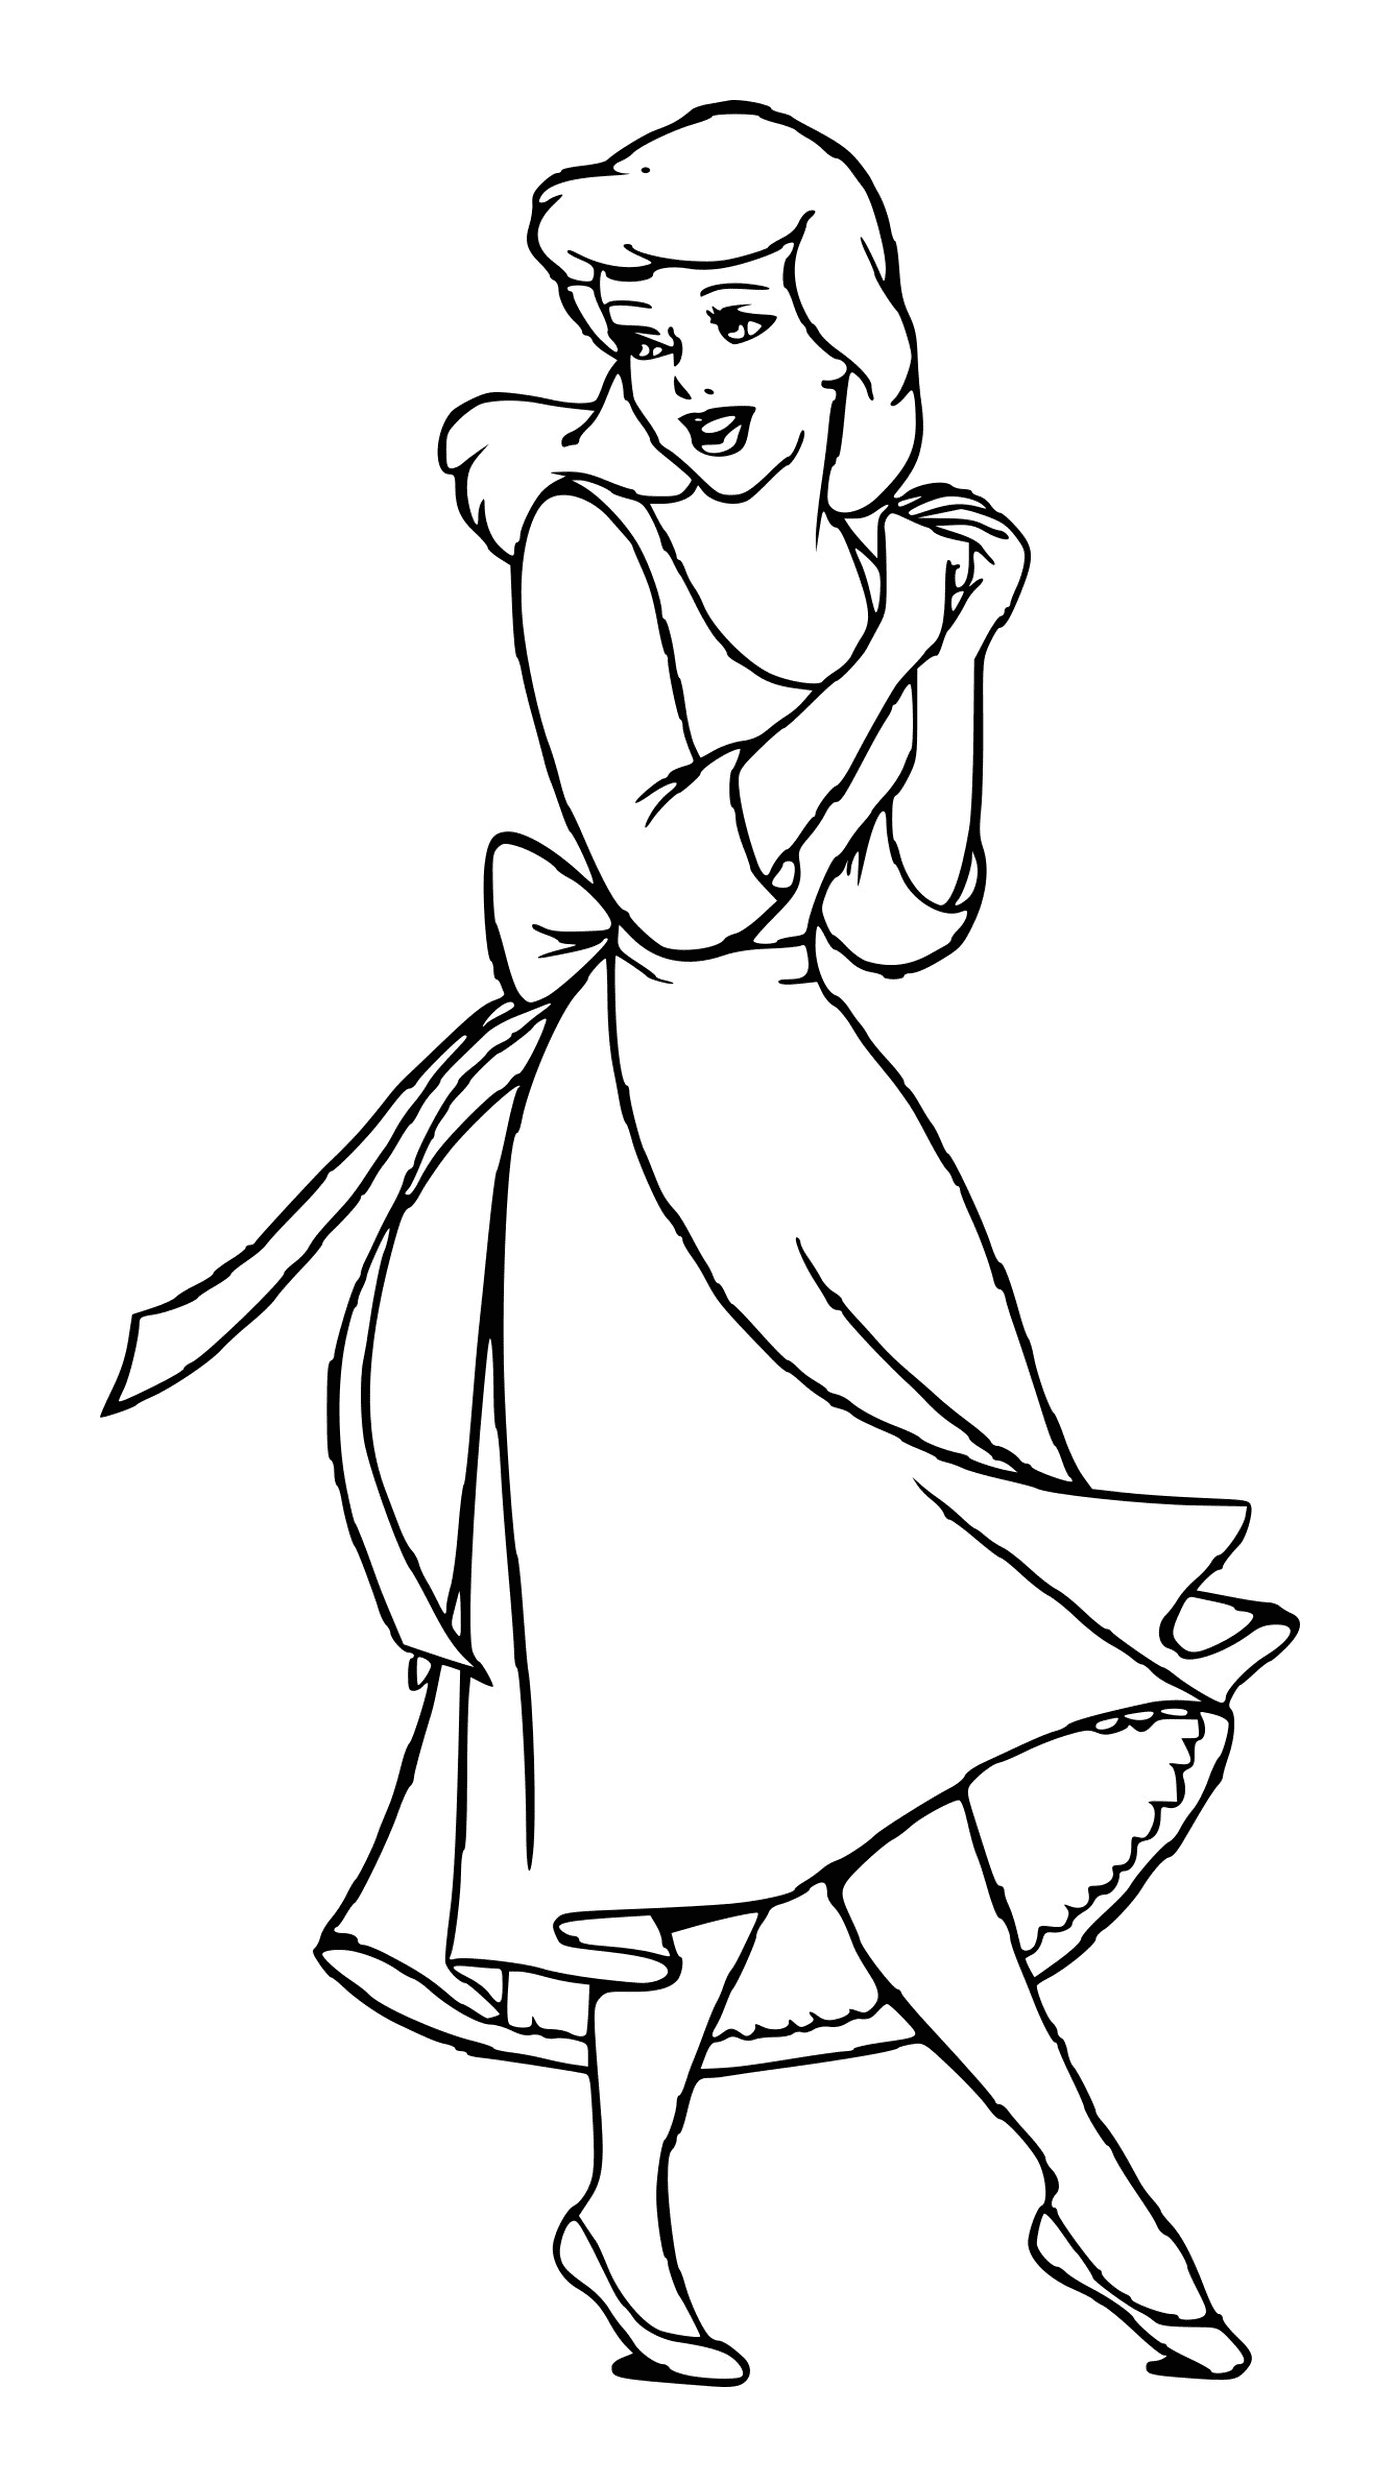  A woman in a dress 